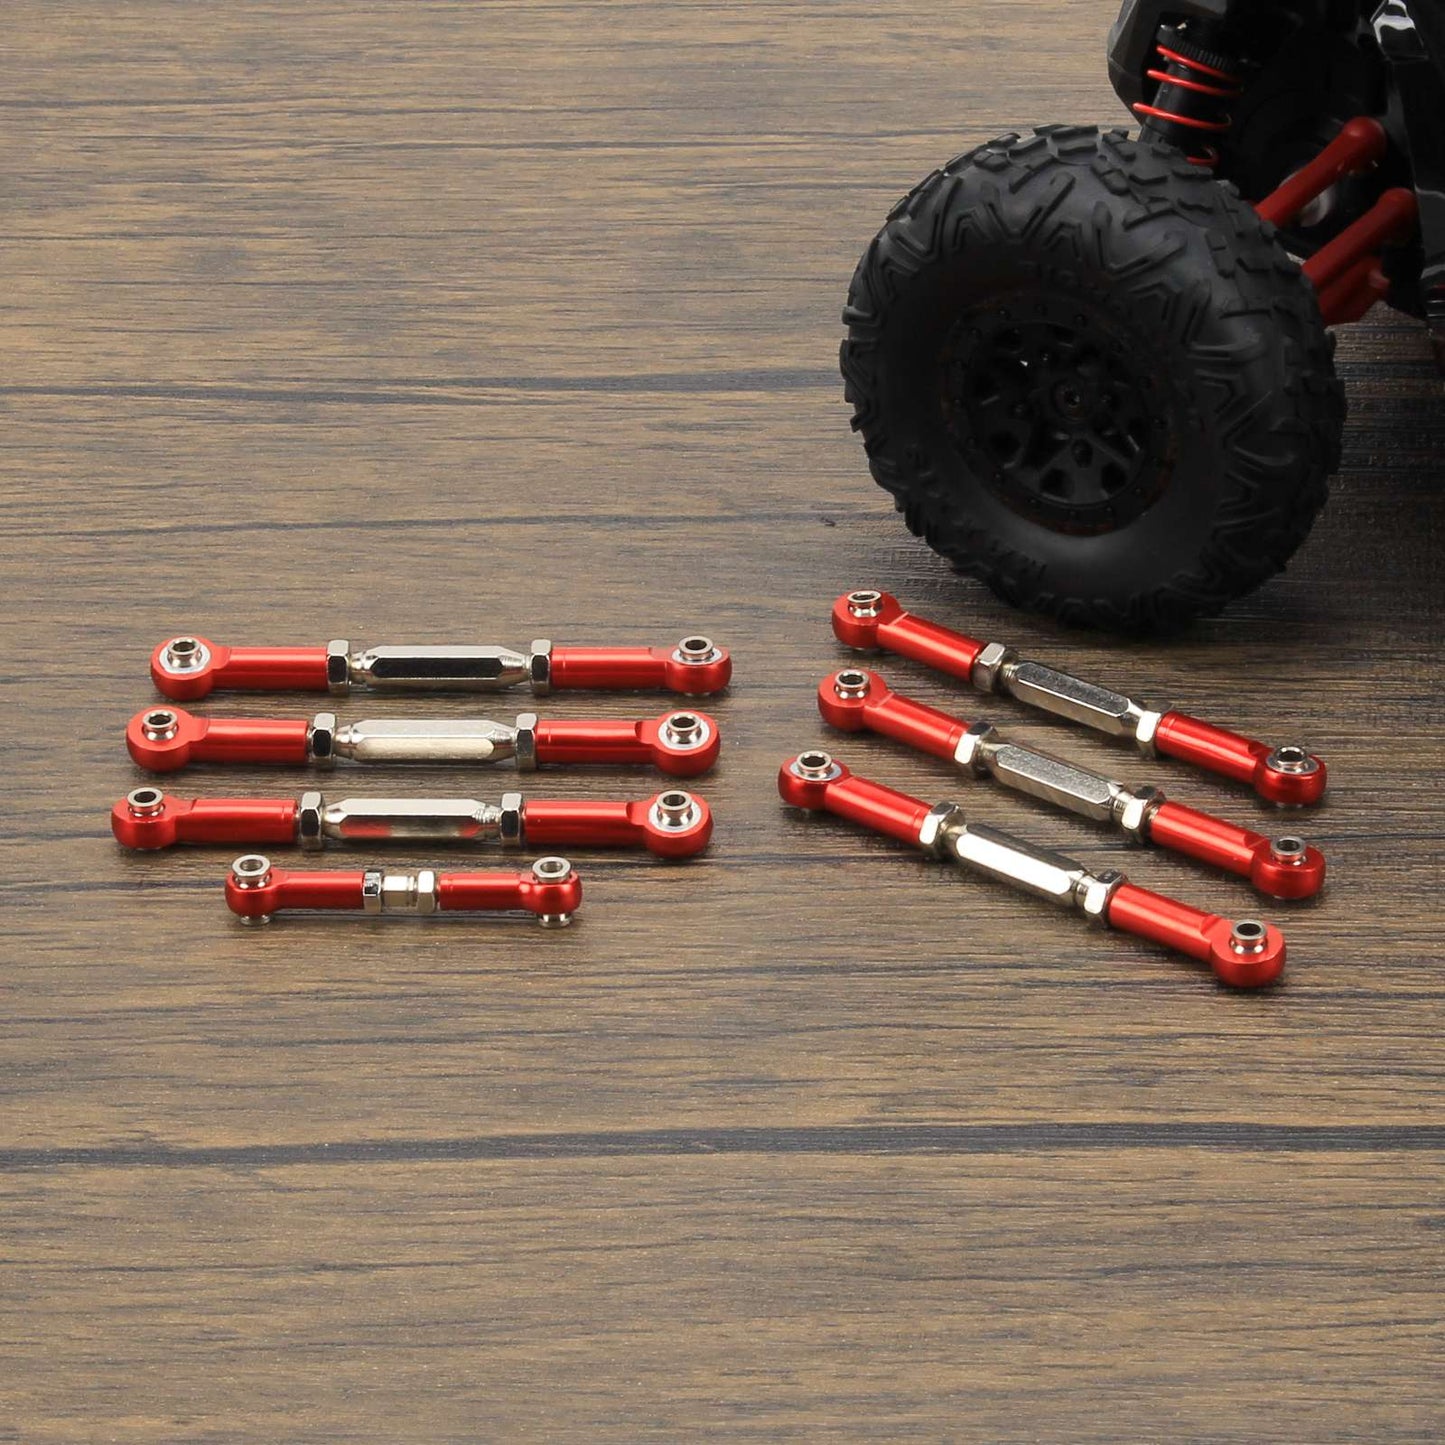 RCAWD TRAXXAS SLASH RCAWD Aluminum Turnbuckles Camber Link with Rod Ends Sets for 1/10 Slash 4X4 Upgrade Parts 7pcs